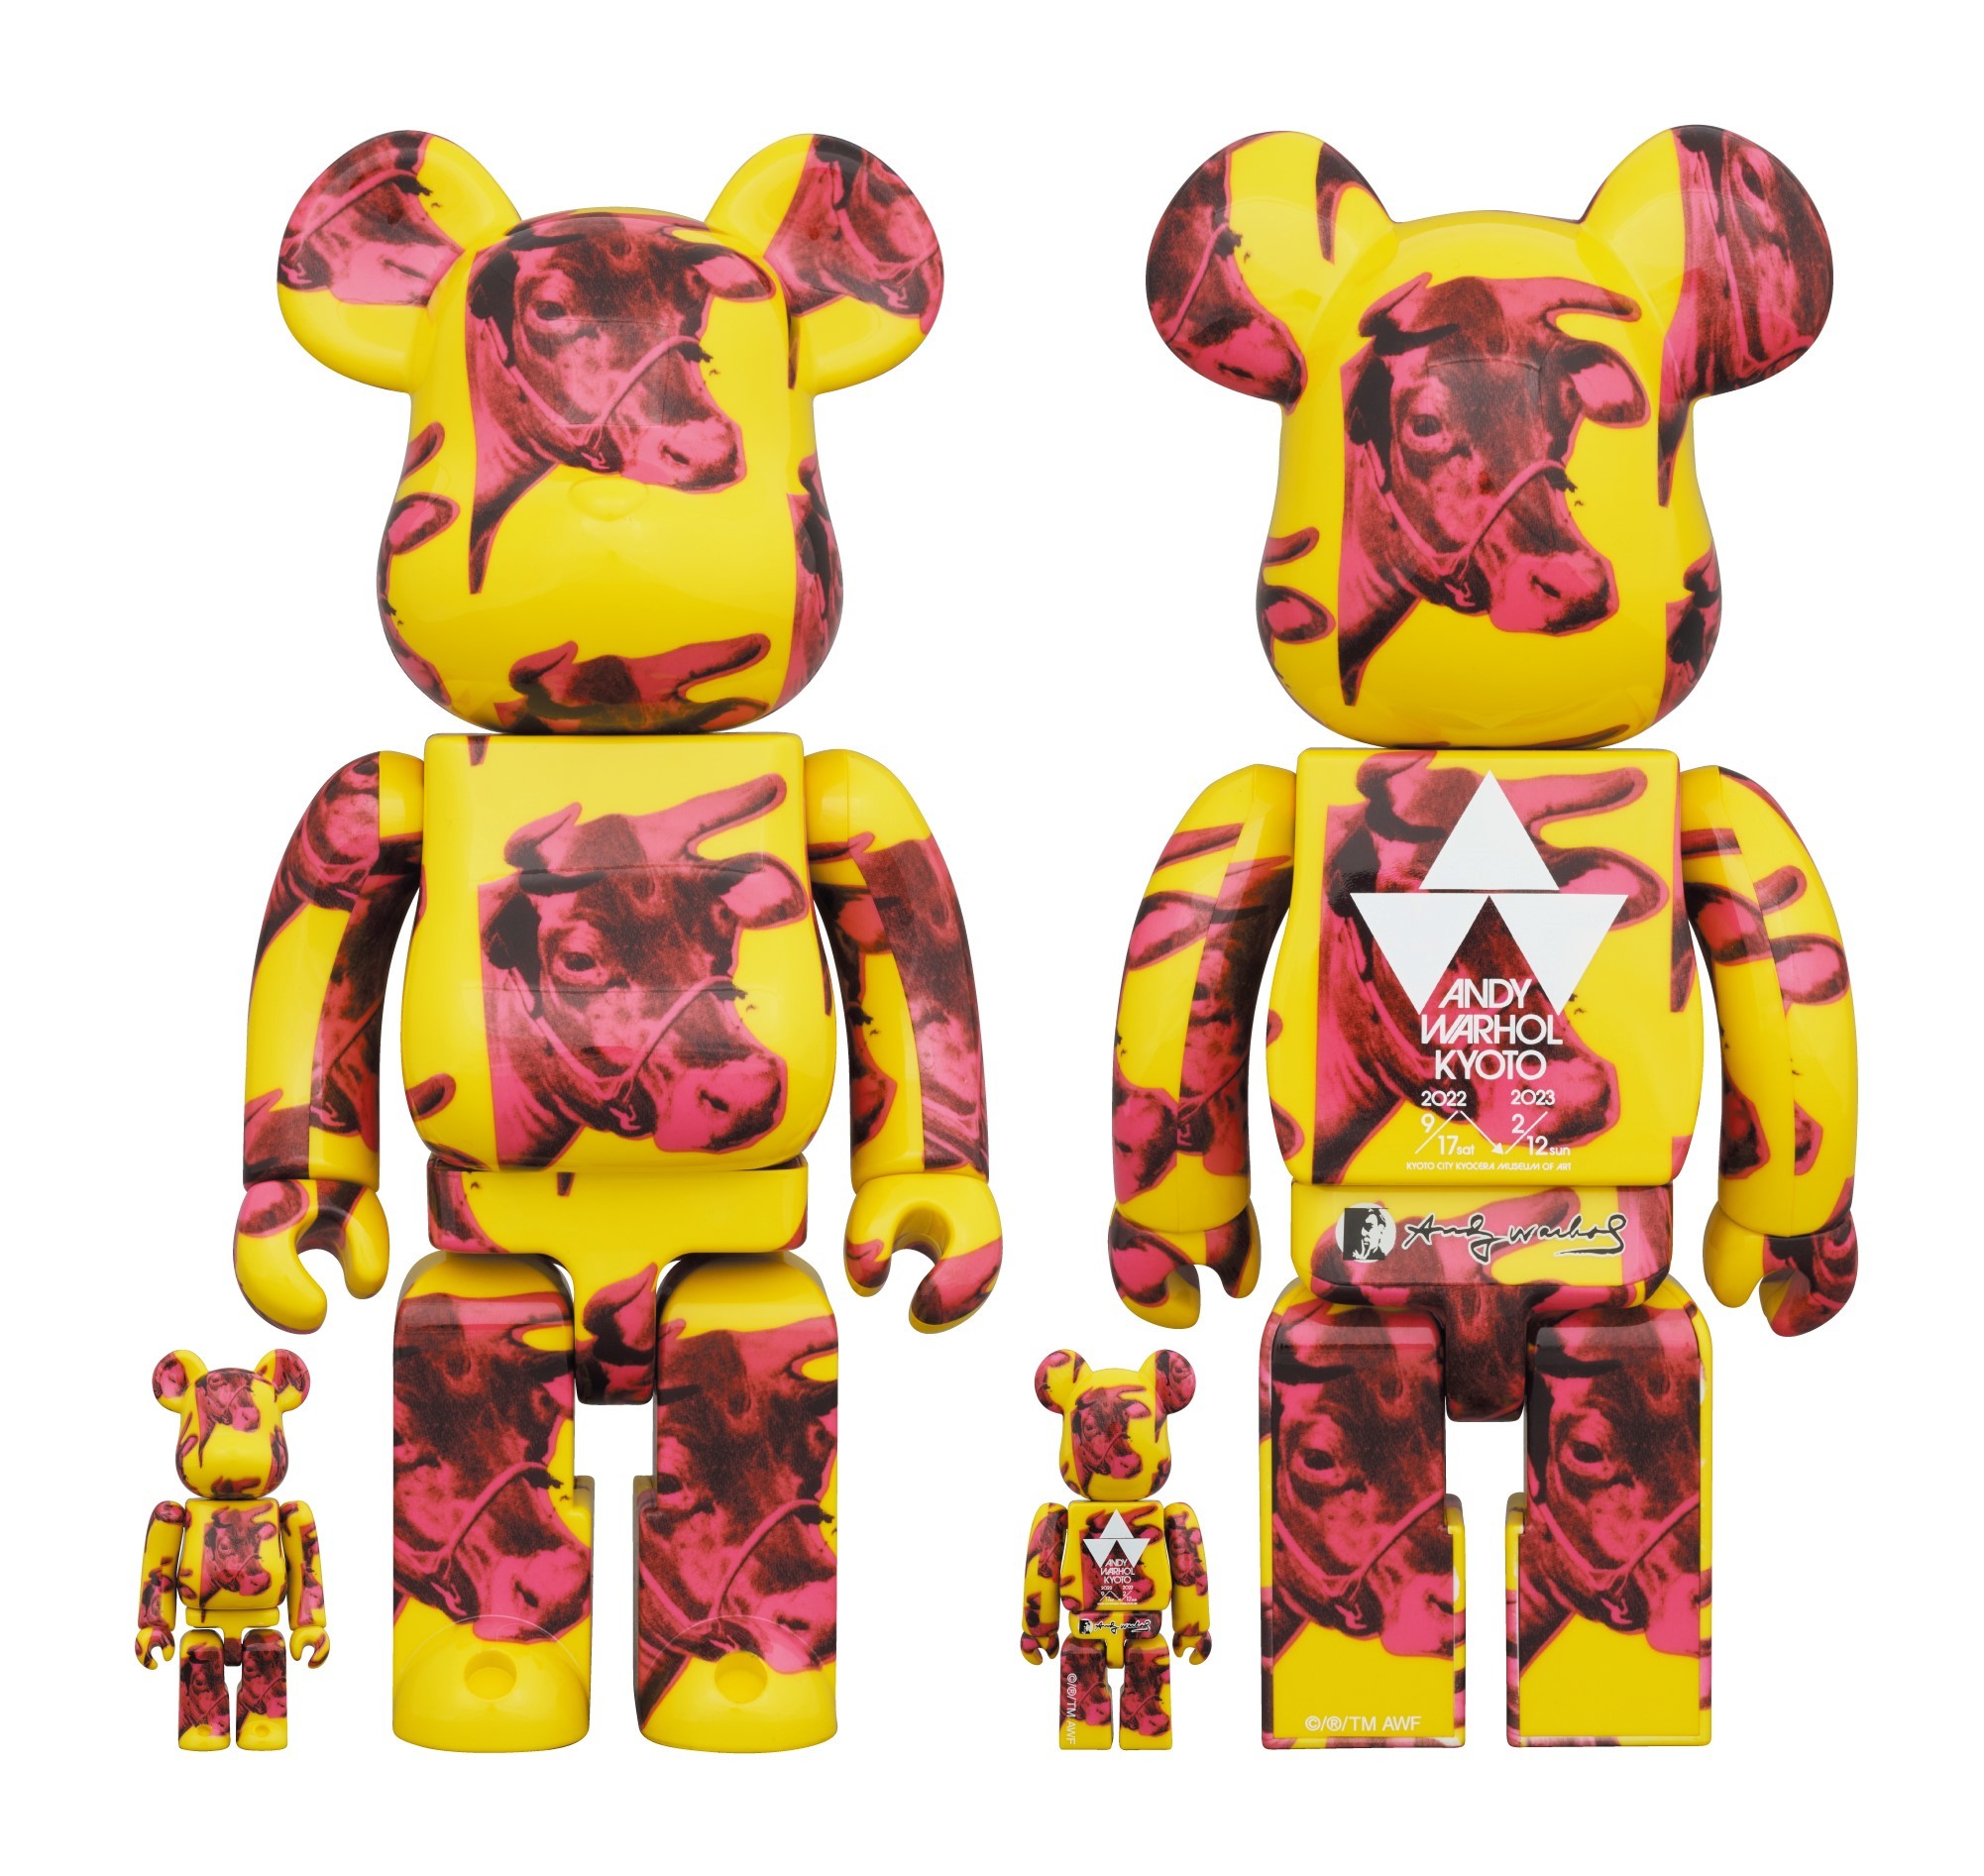 BE＠BRICK ANDY WARHOL "Cow Wallpaper" 100% & 400% (C)/(R)/TM The Andy Warhol Foundation for the Visual Arts, Inc.  BE@RBRICK TM & (C) 2001-2022 MEDICOM TOY CORPORATION. All rights reserved.